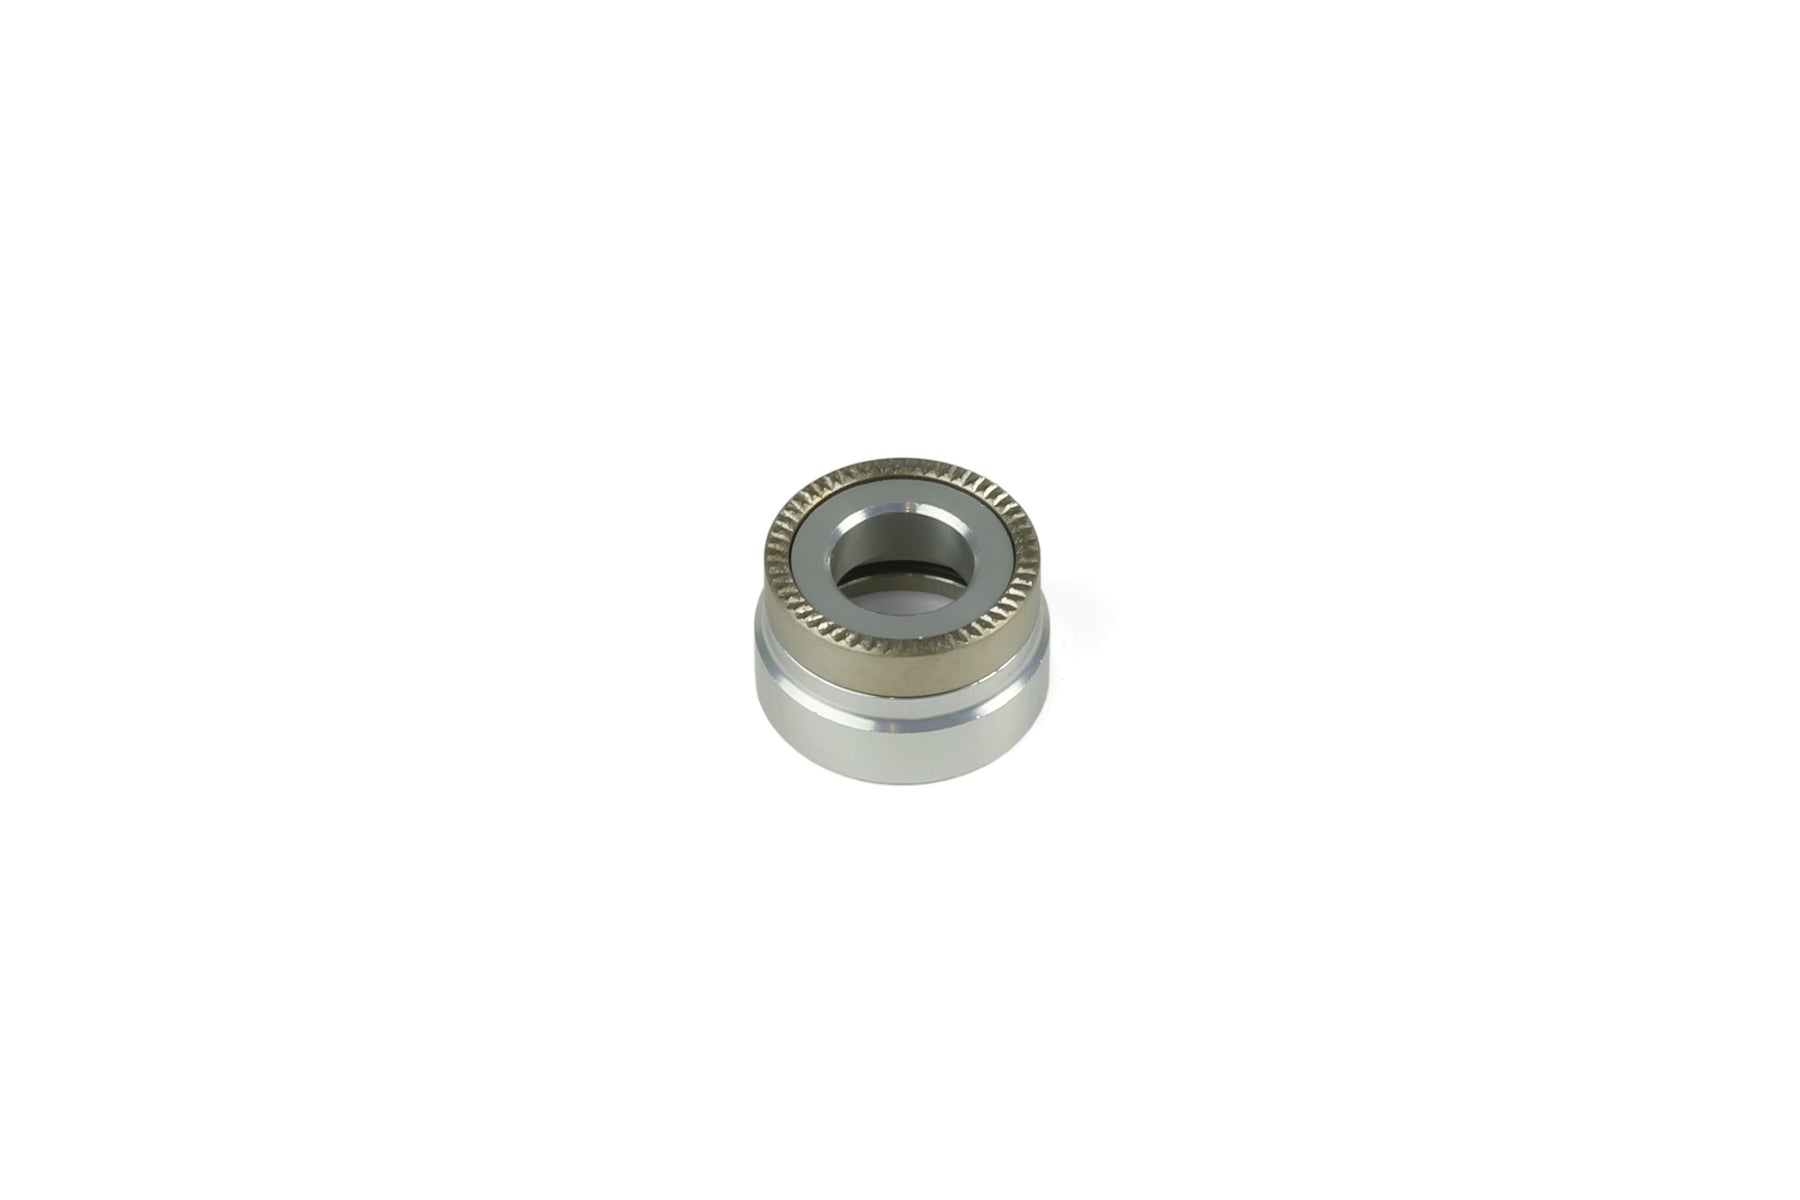 Hope Evo/Pro 4/Xc6/Xc3 10Mm Drive-Side Spacer